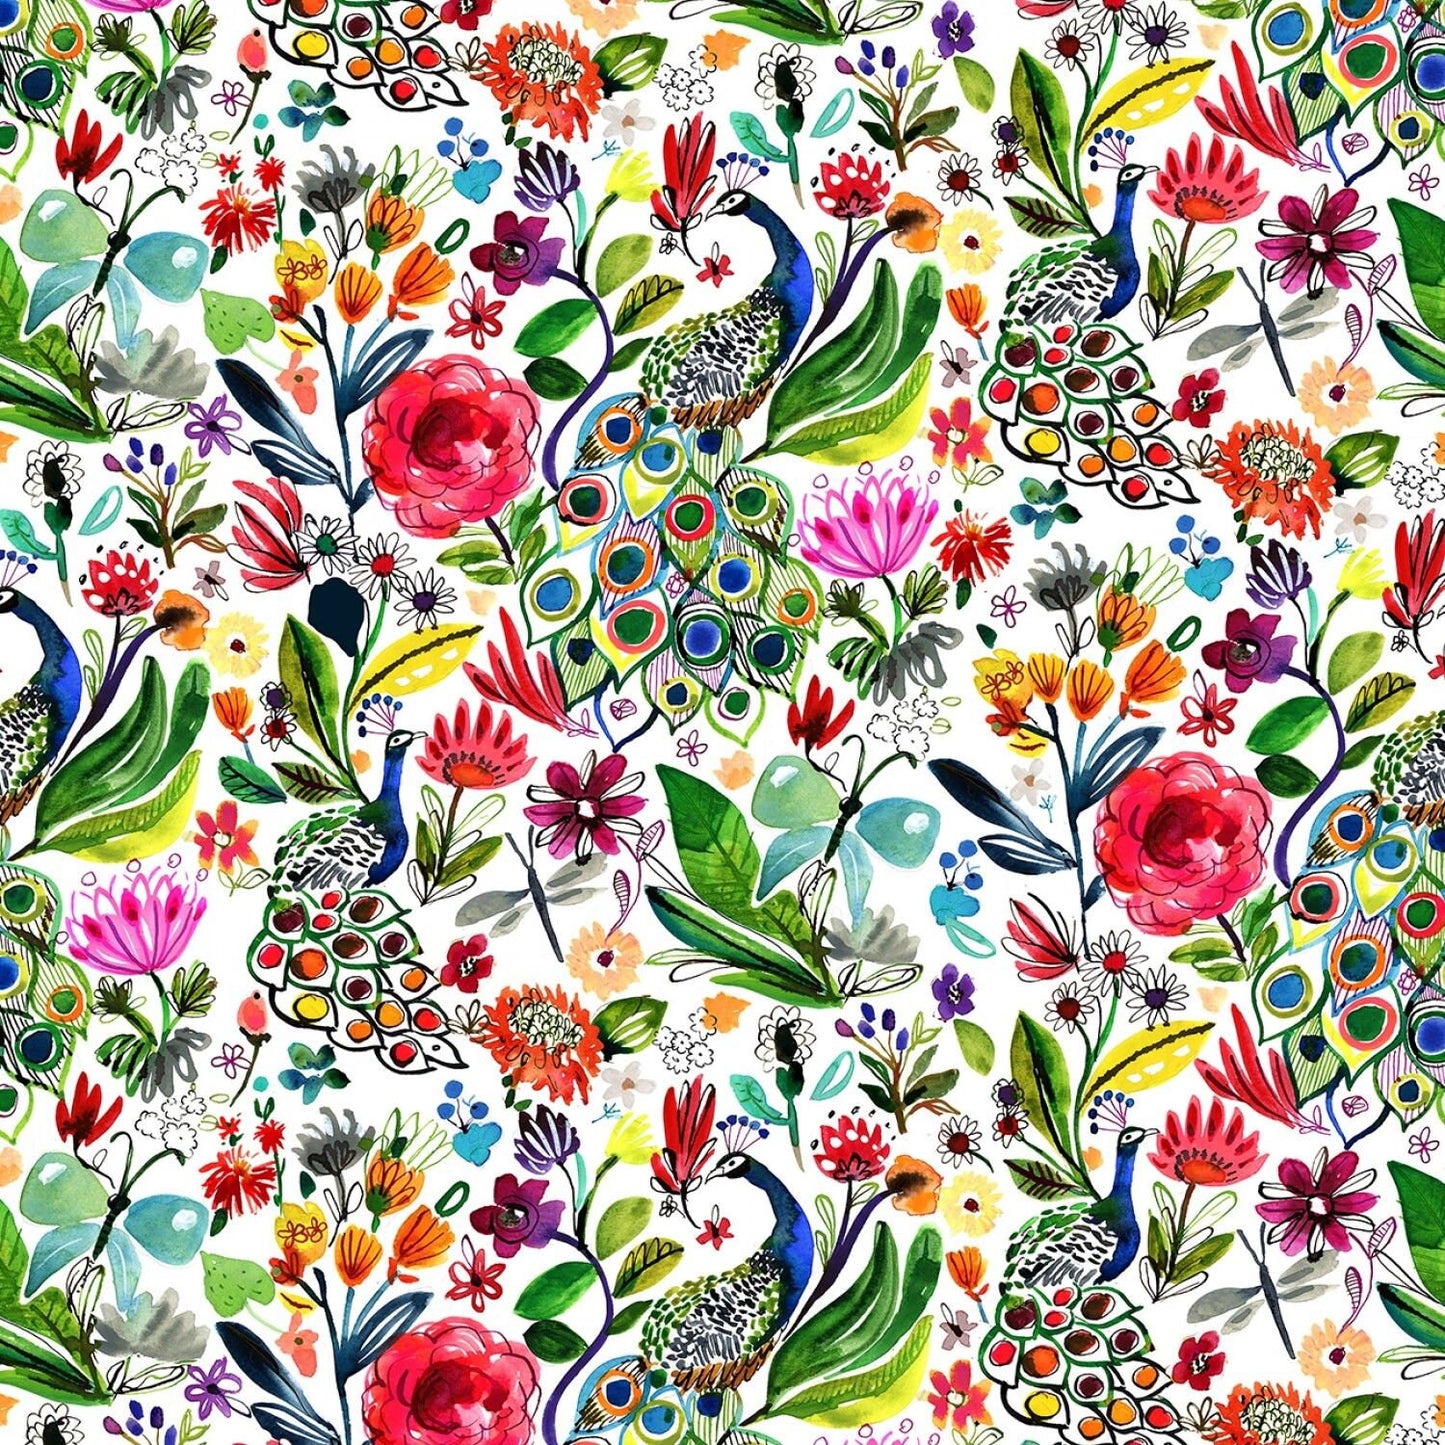 Tree of Life by August Wren Peacocks ST-DJL1756WH Cotton Woven Fabric